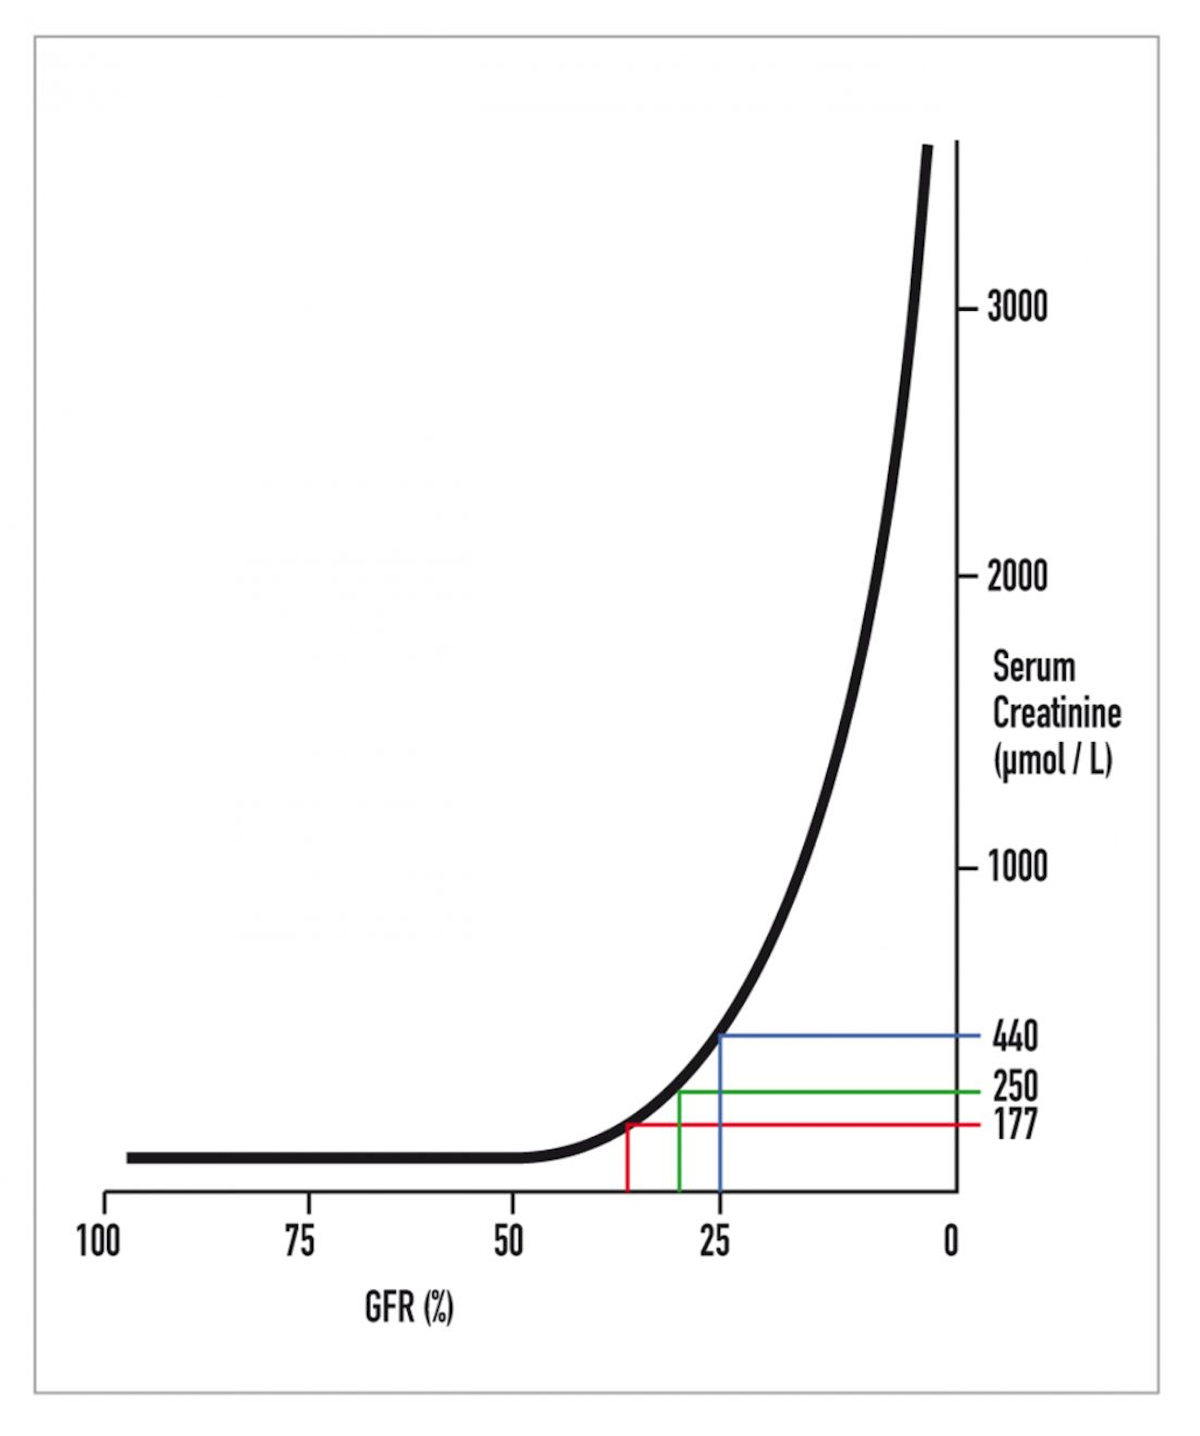 The curvilinear relationship between serum creatinine and glomerular filtration rate. 177 µmol/L represents a common upper reference interval in commercial laboratories and it can be seen clearly on the graph that a significant reduction in GFR occurs before creatinine is above this limit and azotemia is documented. 250 µmol/L is the upper limit for IRIS stage 2 CKD and 440 µmol/L is the upper limit for IRIS stage 3 CKD. 